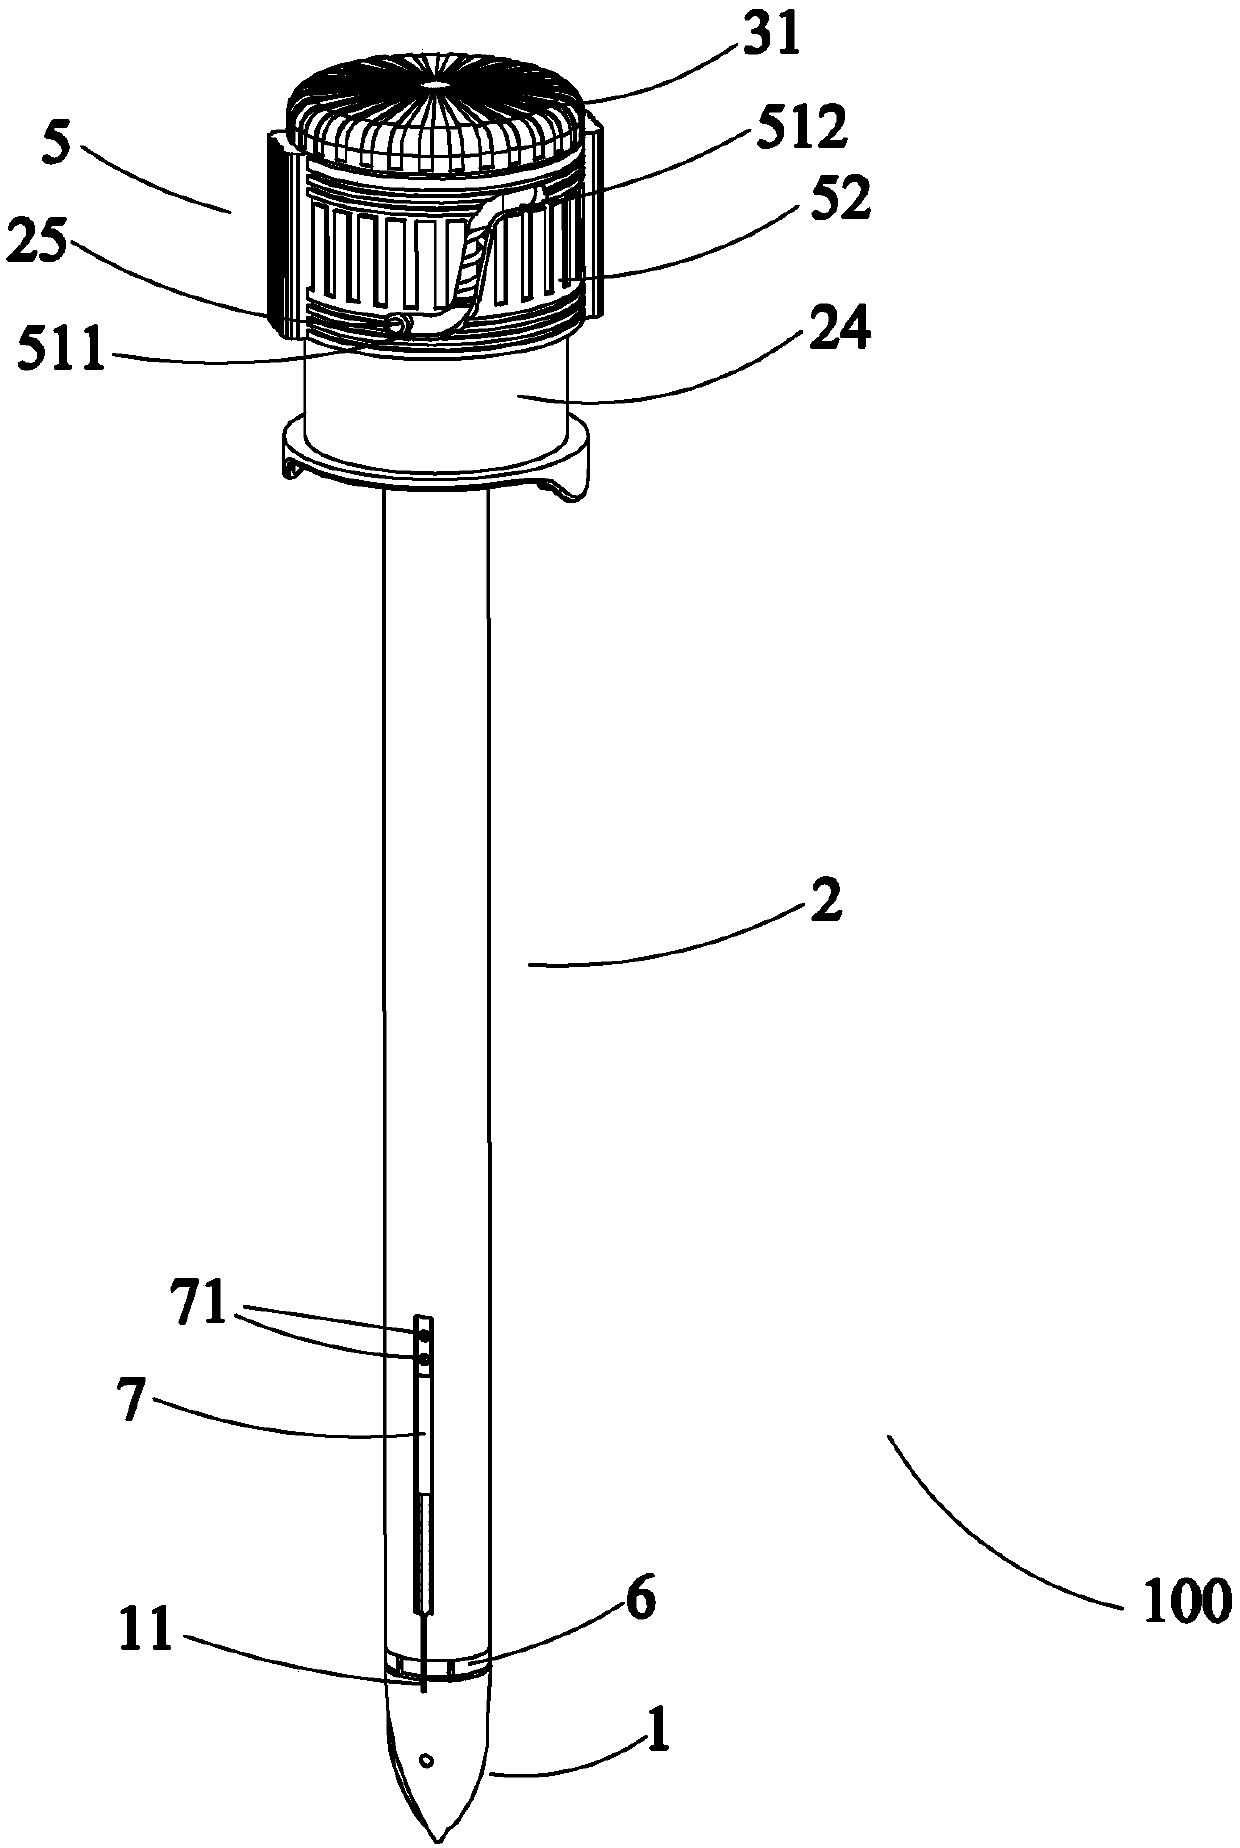 Application method of puncture device